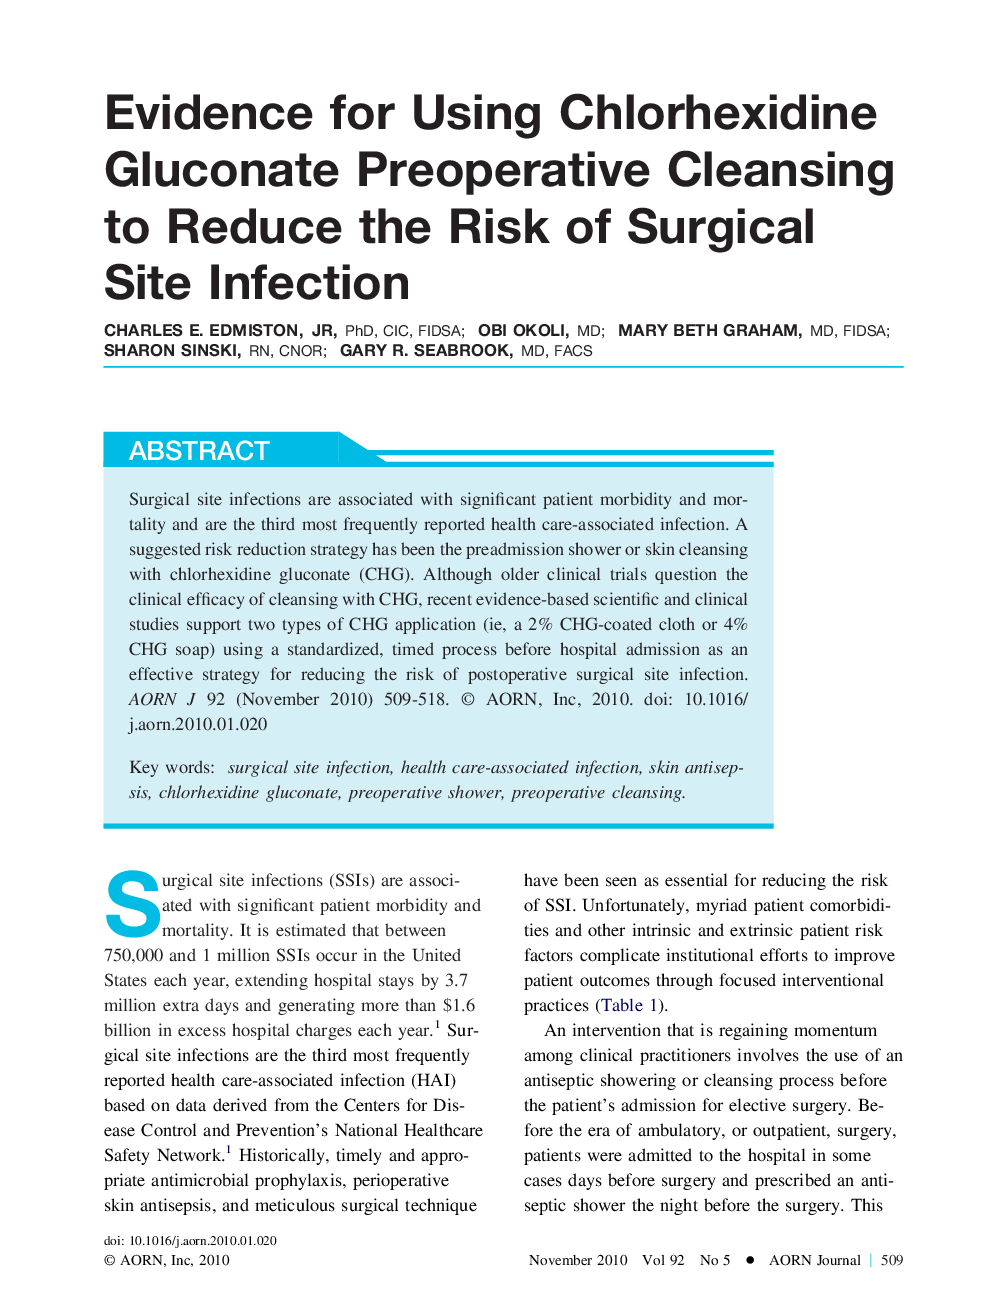 Evidence for Using Chlorhexidine Gluconate Preoperative Cleansing to Reduce the Risk of Surgical Site Infection